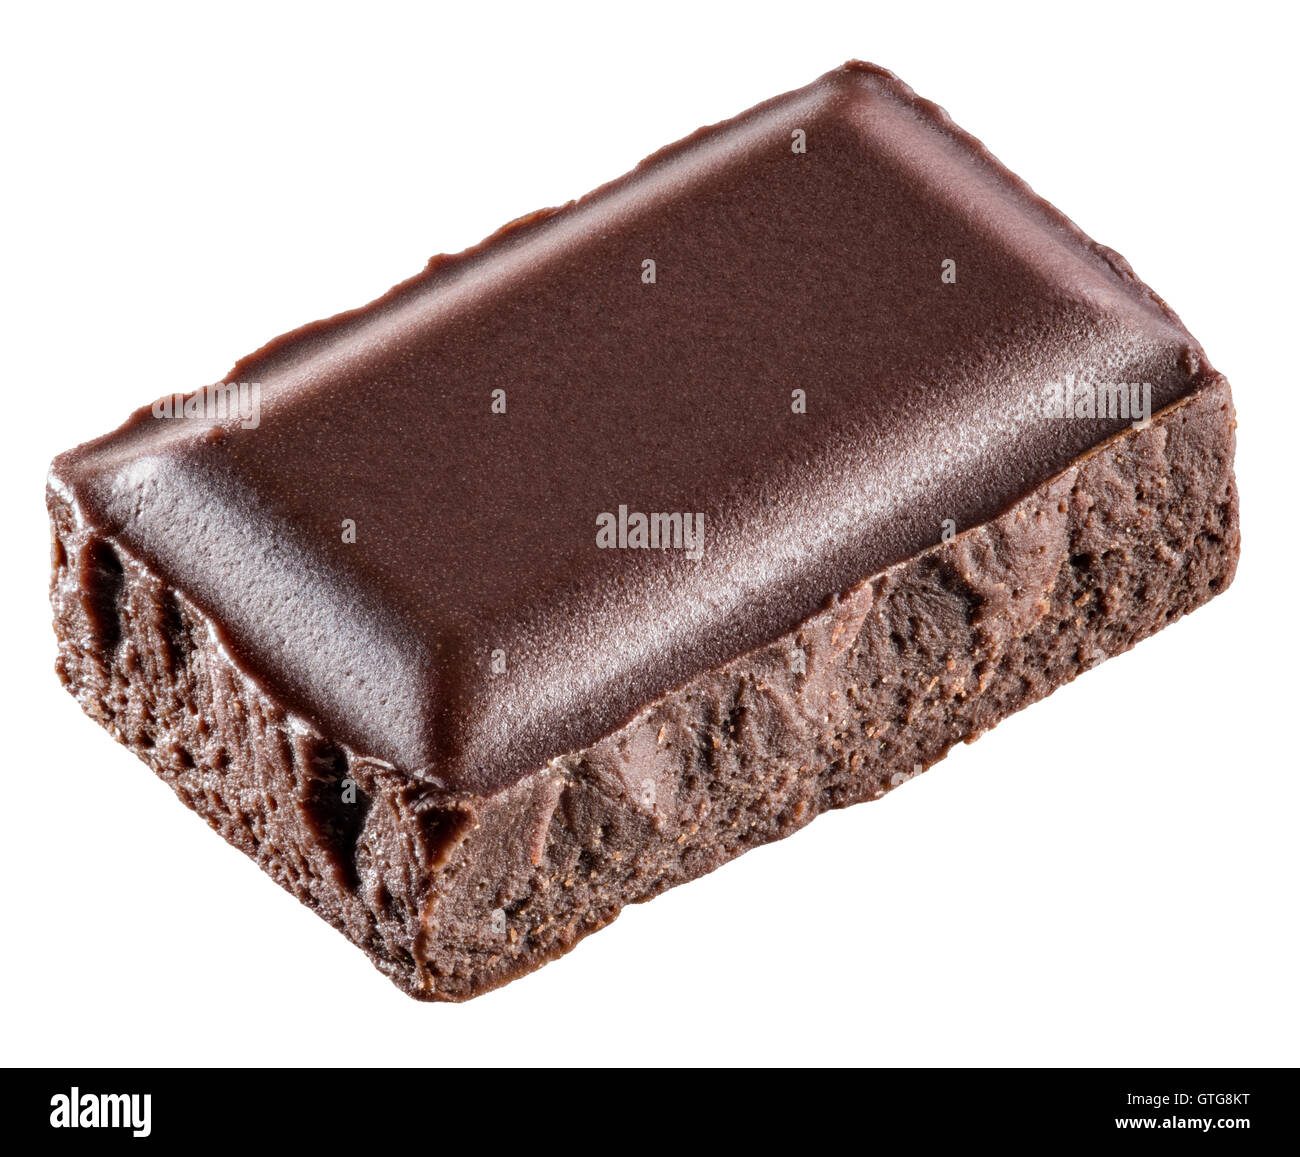 Piece of plain chocolate bar. File contains clipping paths. Stock Photo